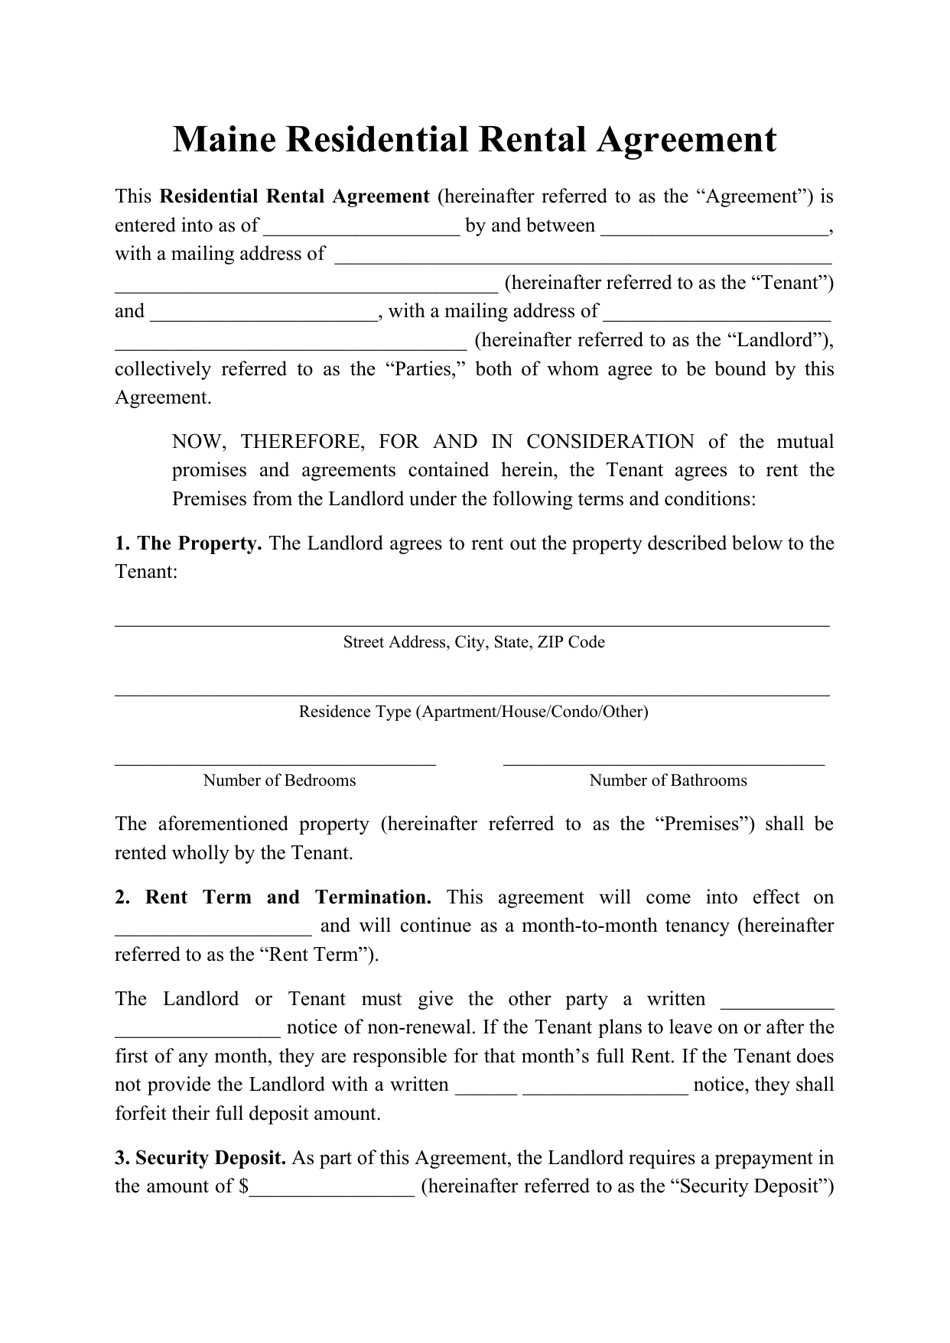 Maine Residential Rental Agreement Template Download Printable PDF